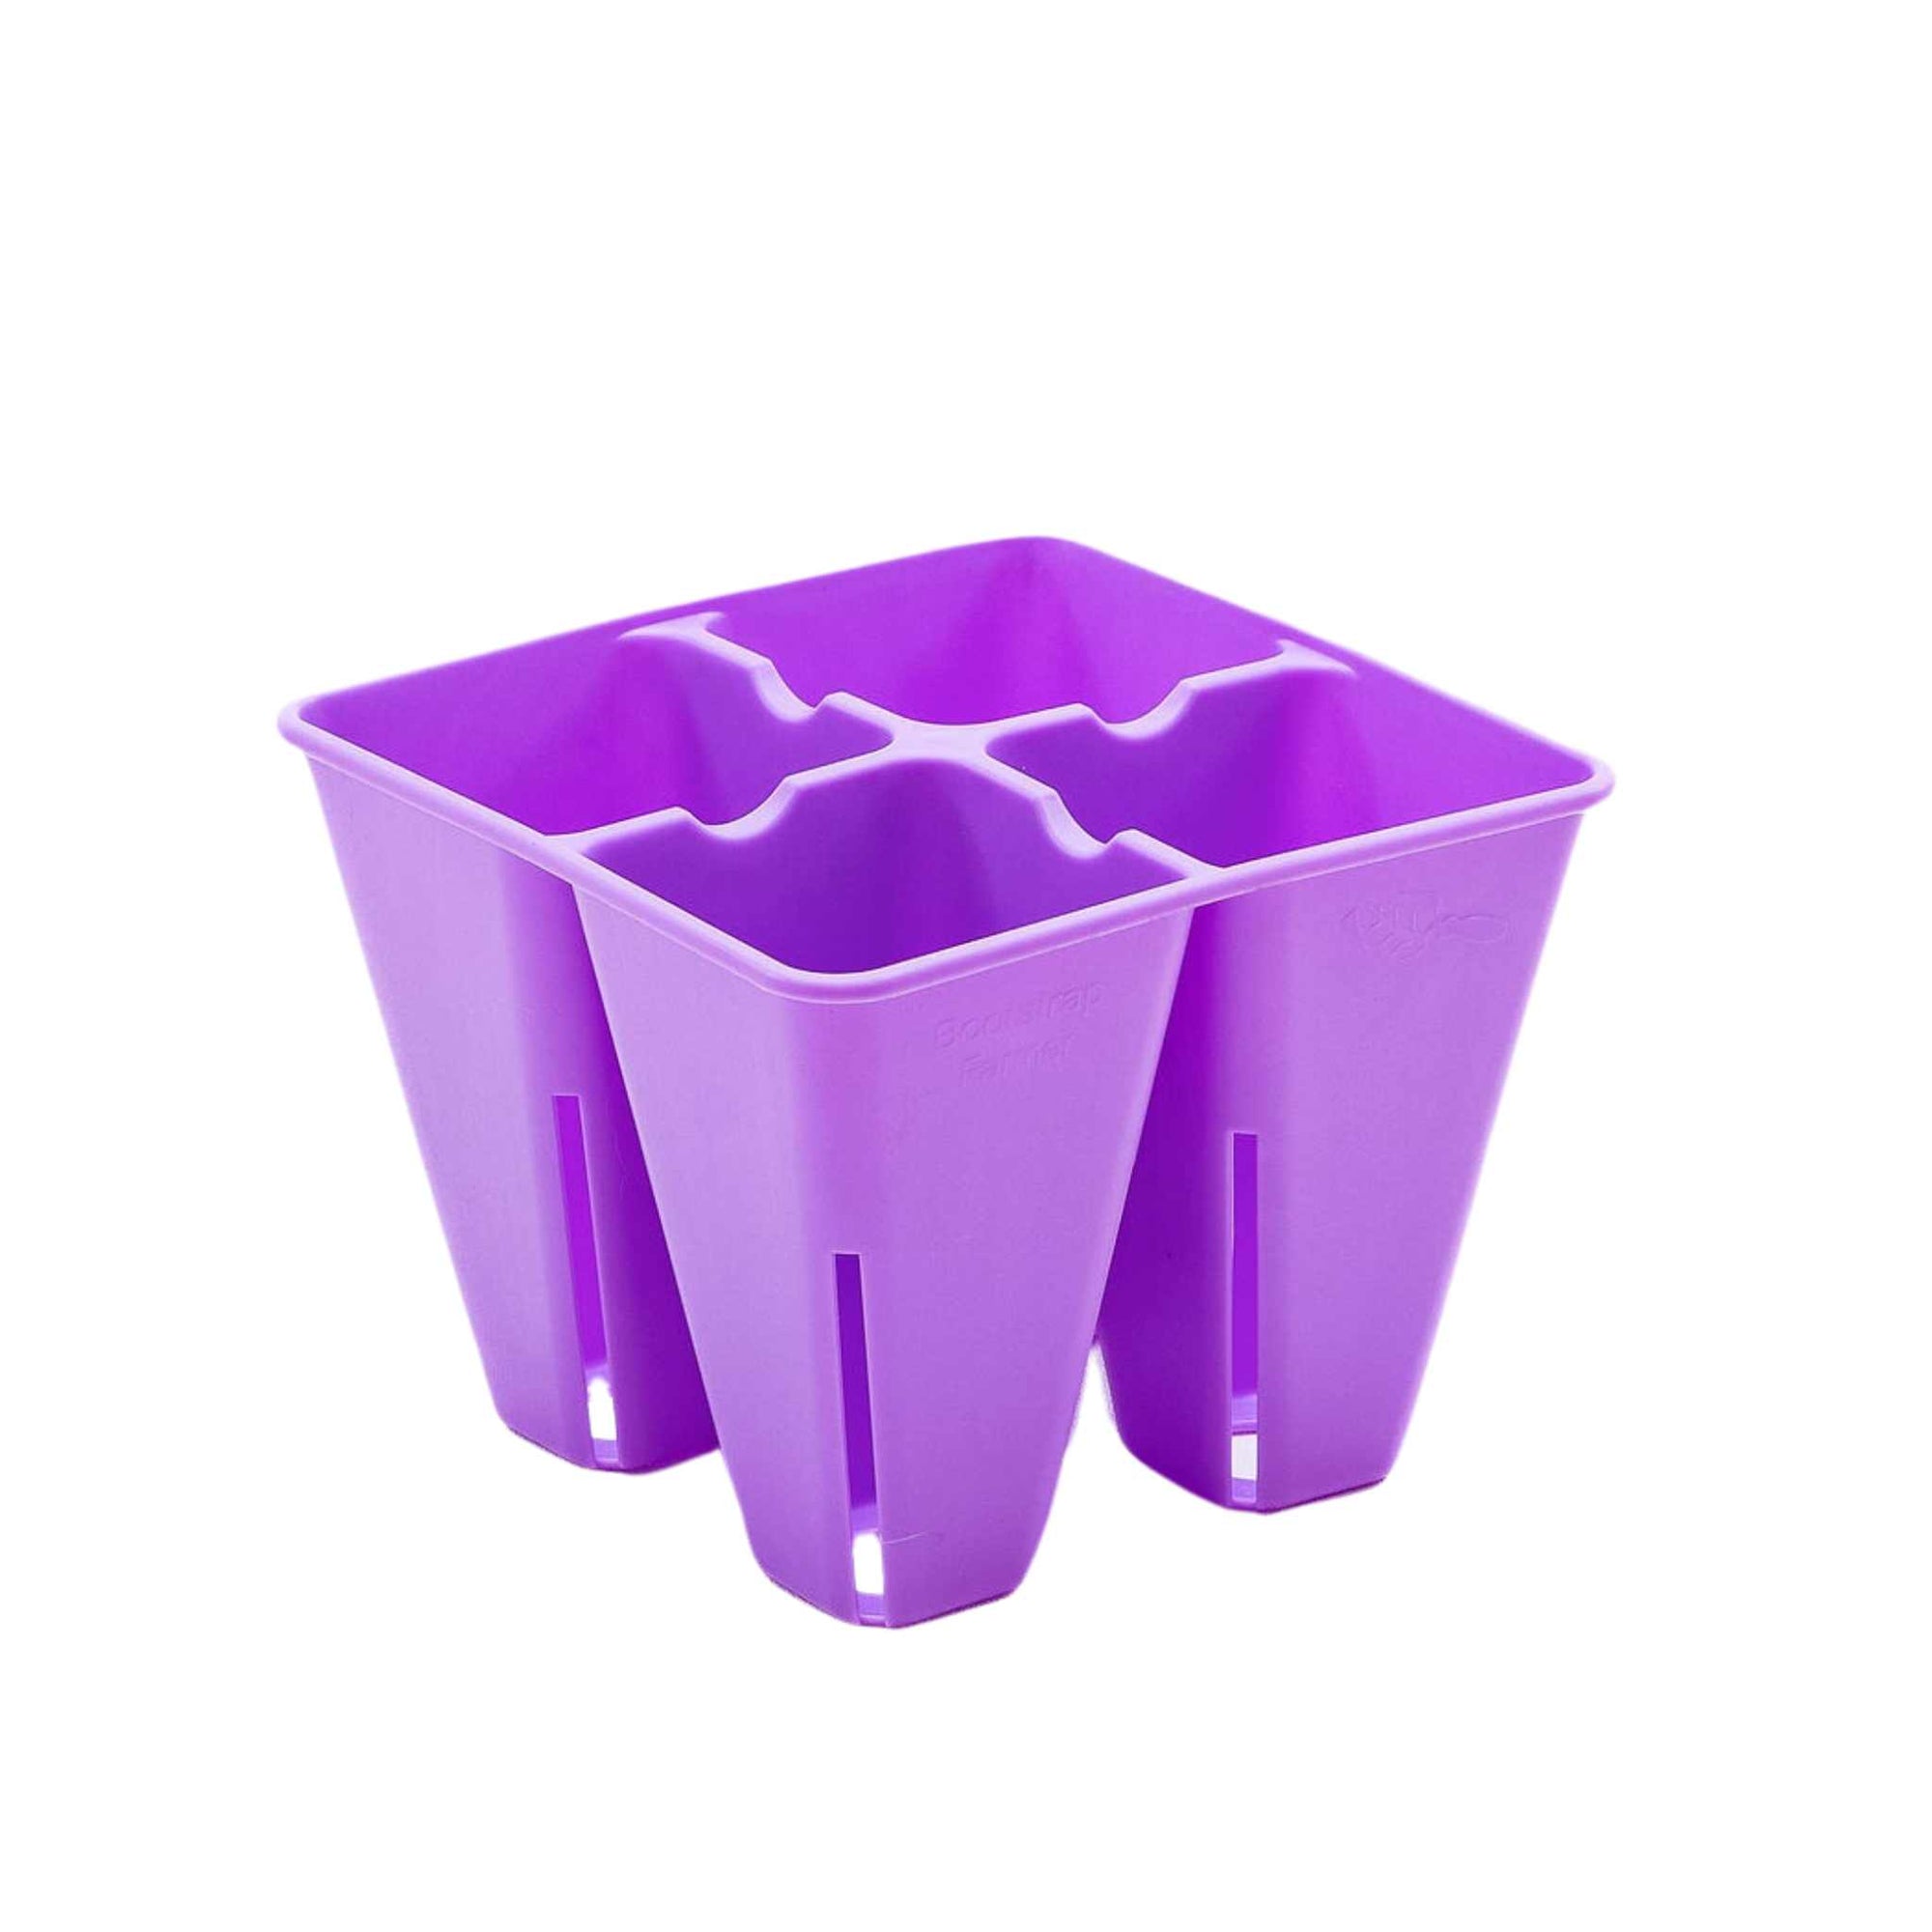 4 Cell plug tray in purple